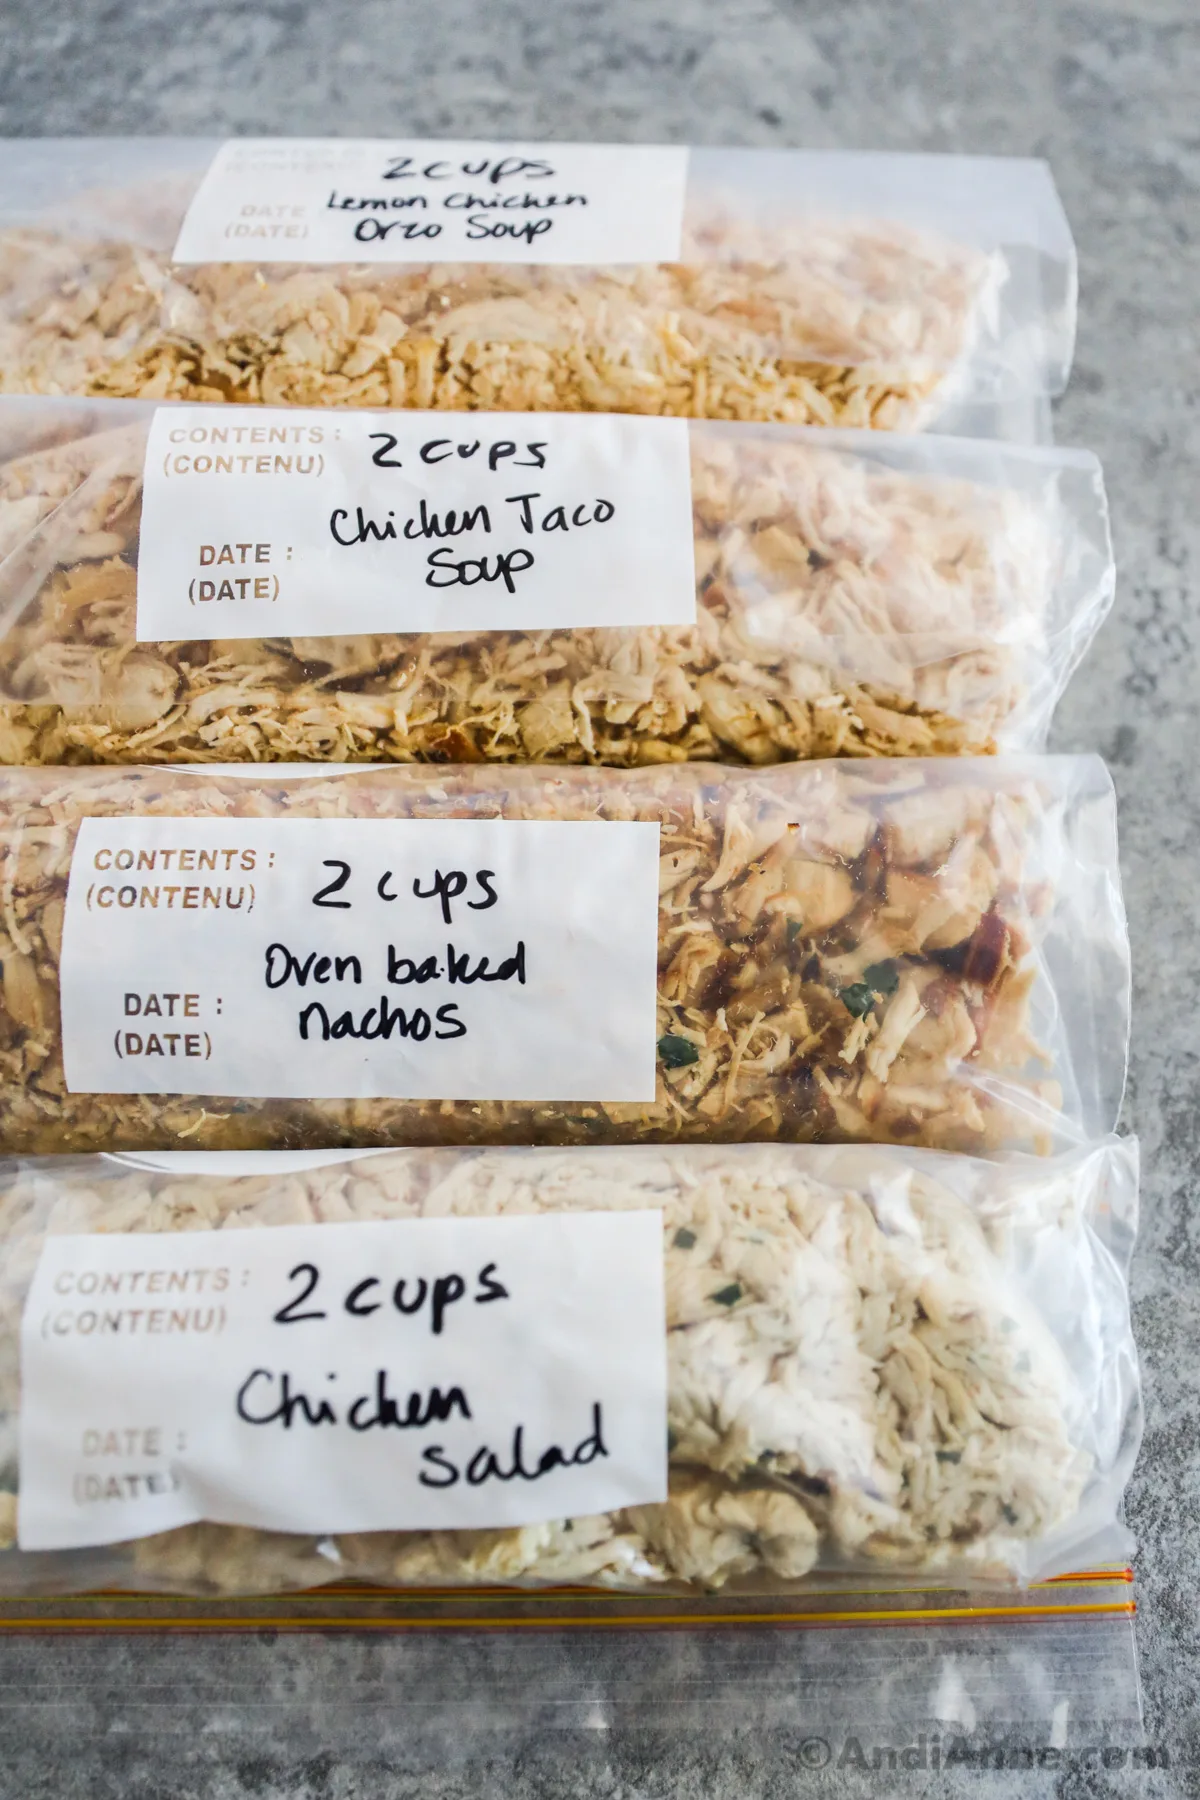 Freezer bags with shredded chicken inside.